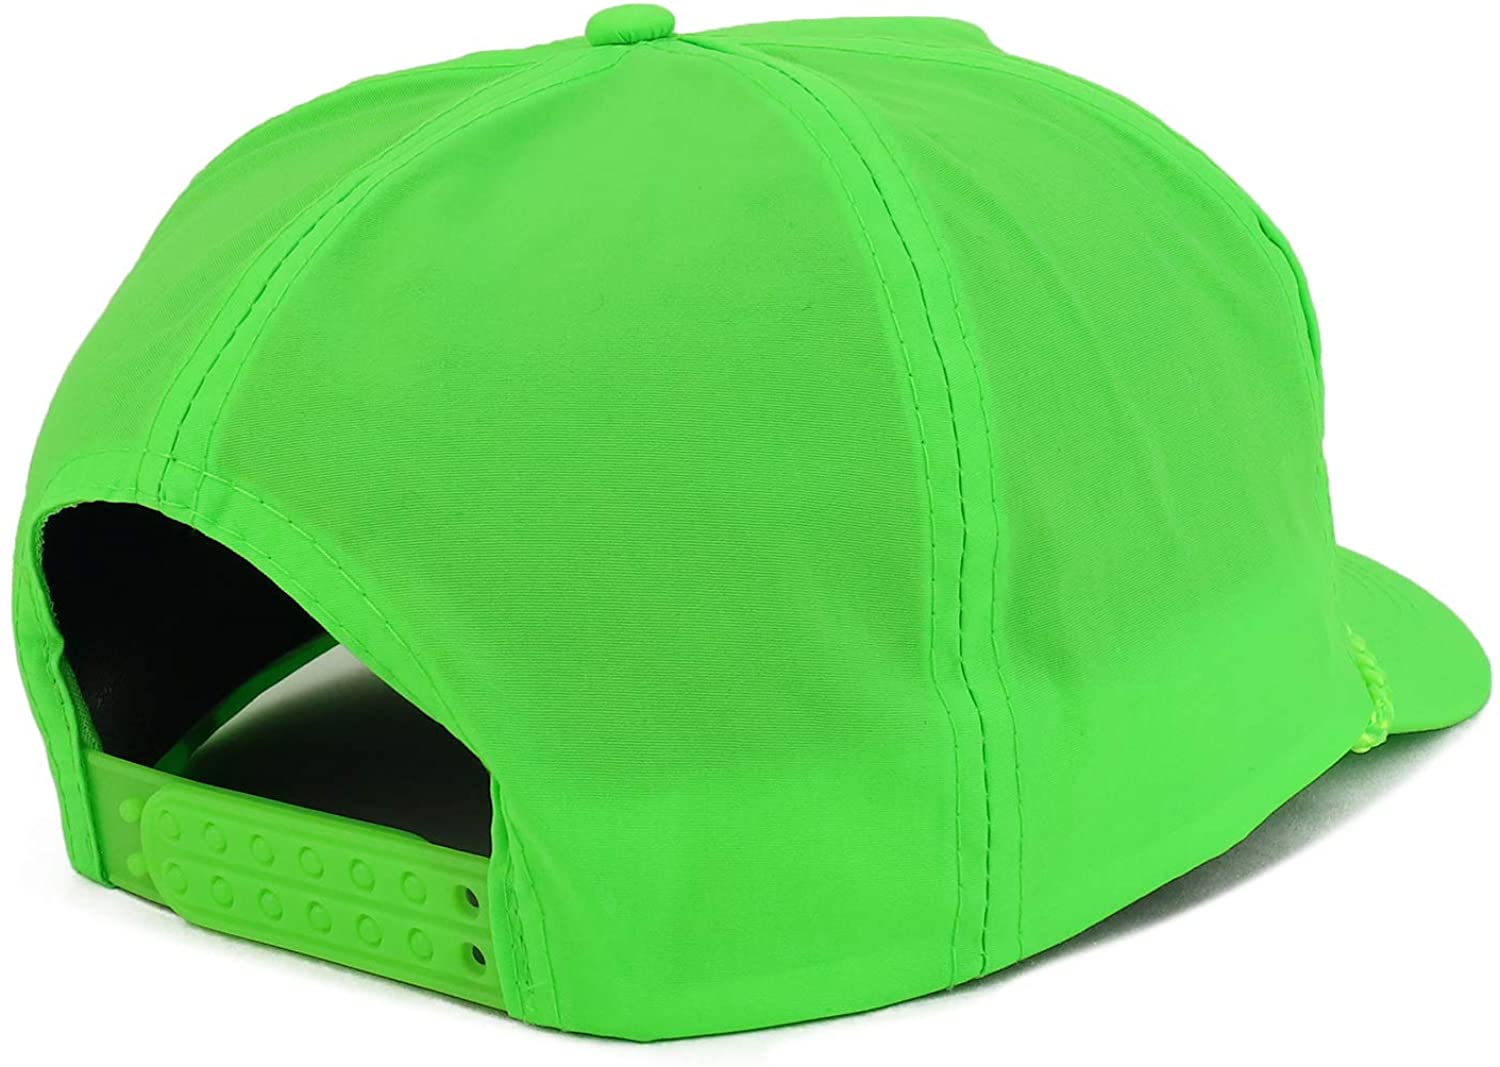 Armycrew 5 Panel Neon Color Nylon Crinkle Cap with Rope Band